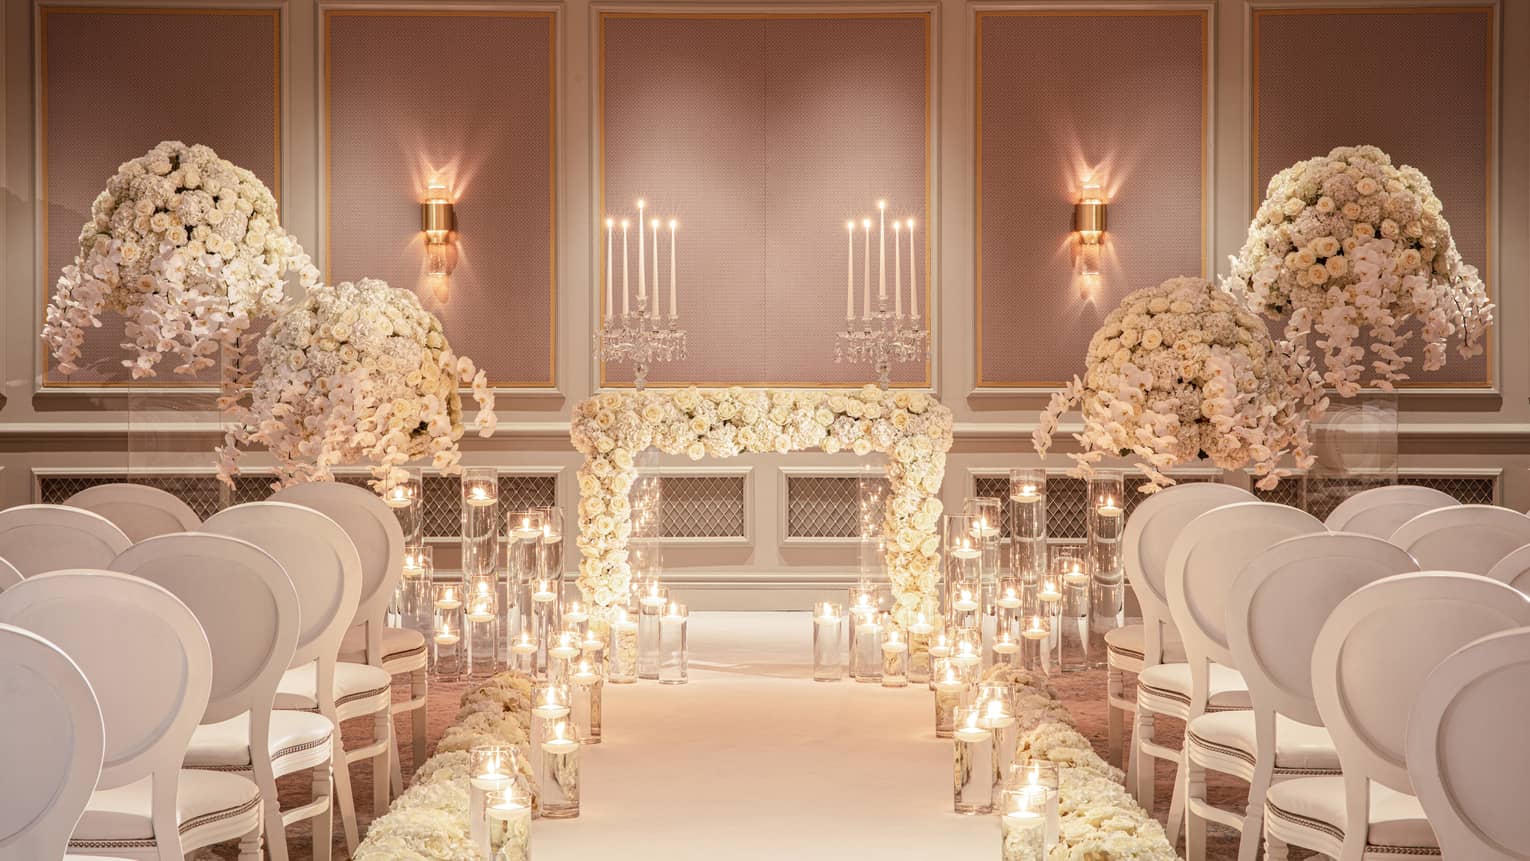 Wedding ceremony set up in event room, glowing candles line aisle with rows of white chairs facing altar